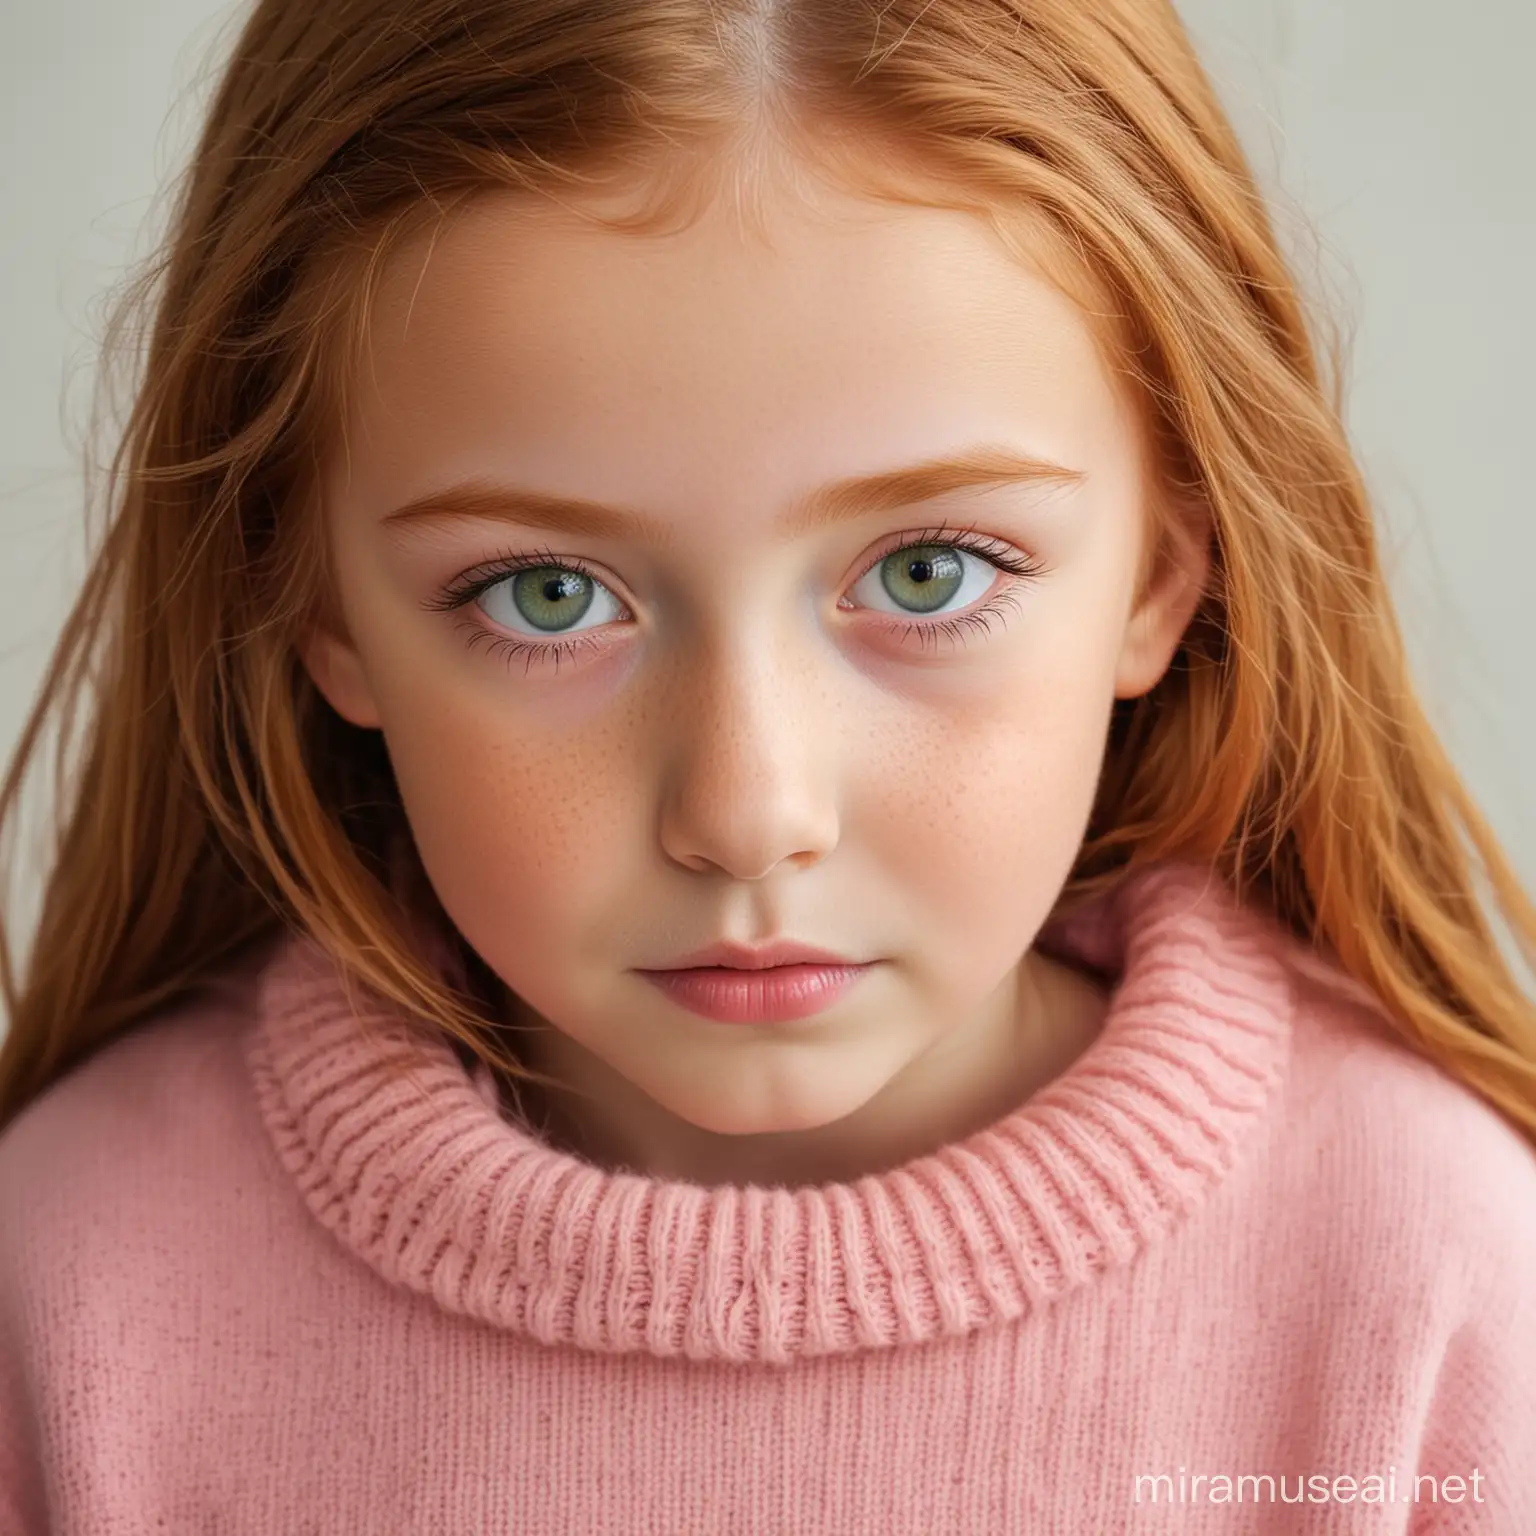 Adorable Gingerhaired Girl in Pink Sweater with Piercing Green Eyes